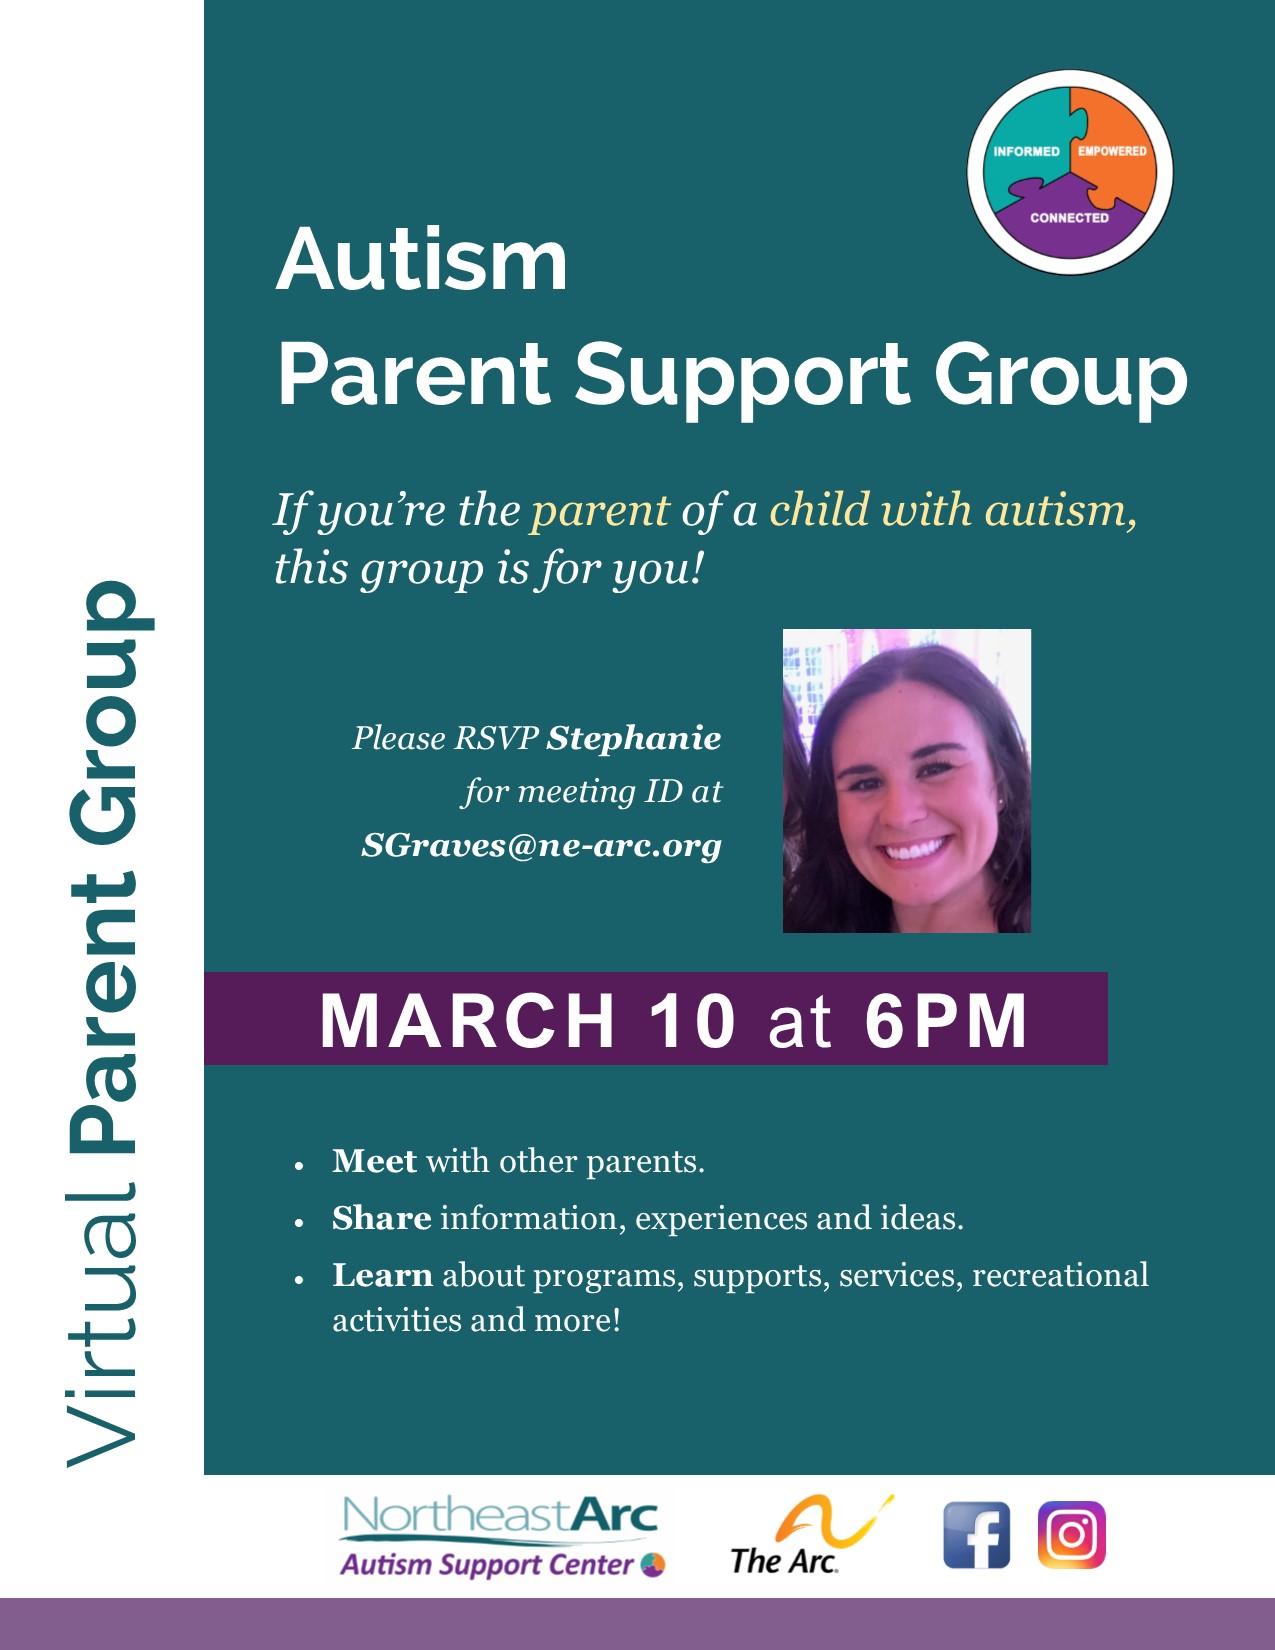 Support Group for Parents of School Age Children with Autism. March 10 at 6PM. RSVP Stephanie at SGraves@ne-arc.org for zoom meeting ID to attend.